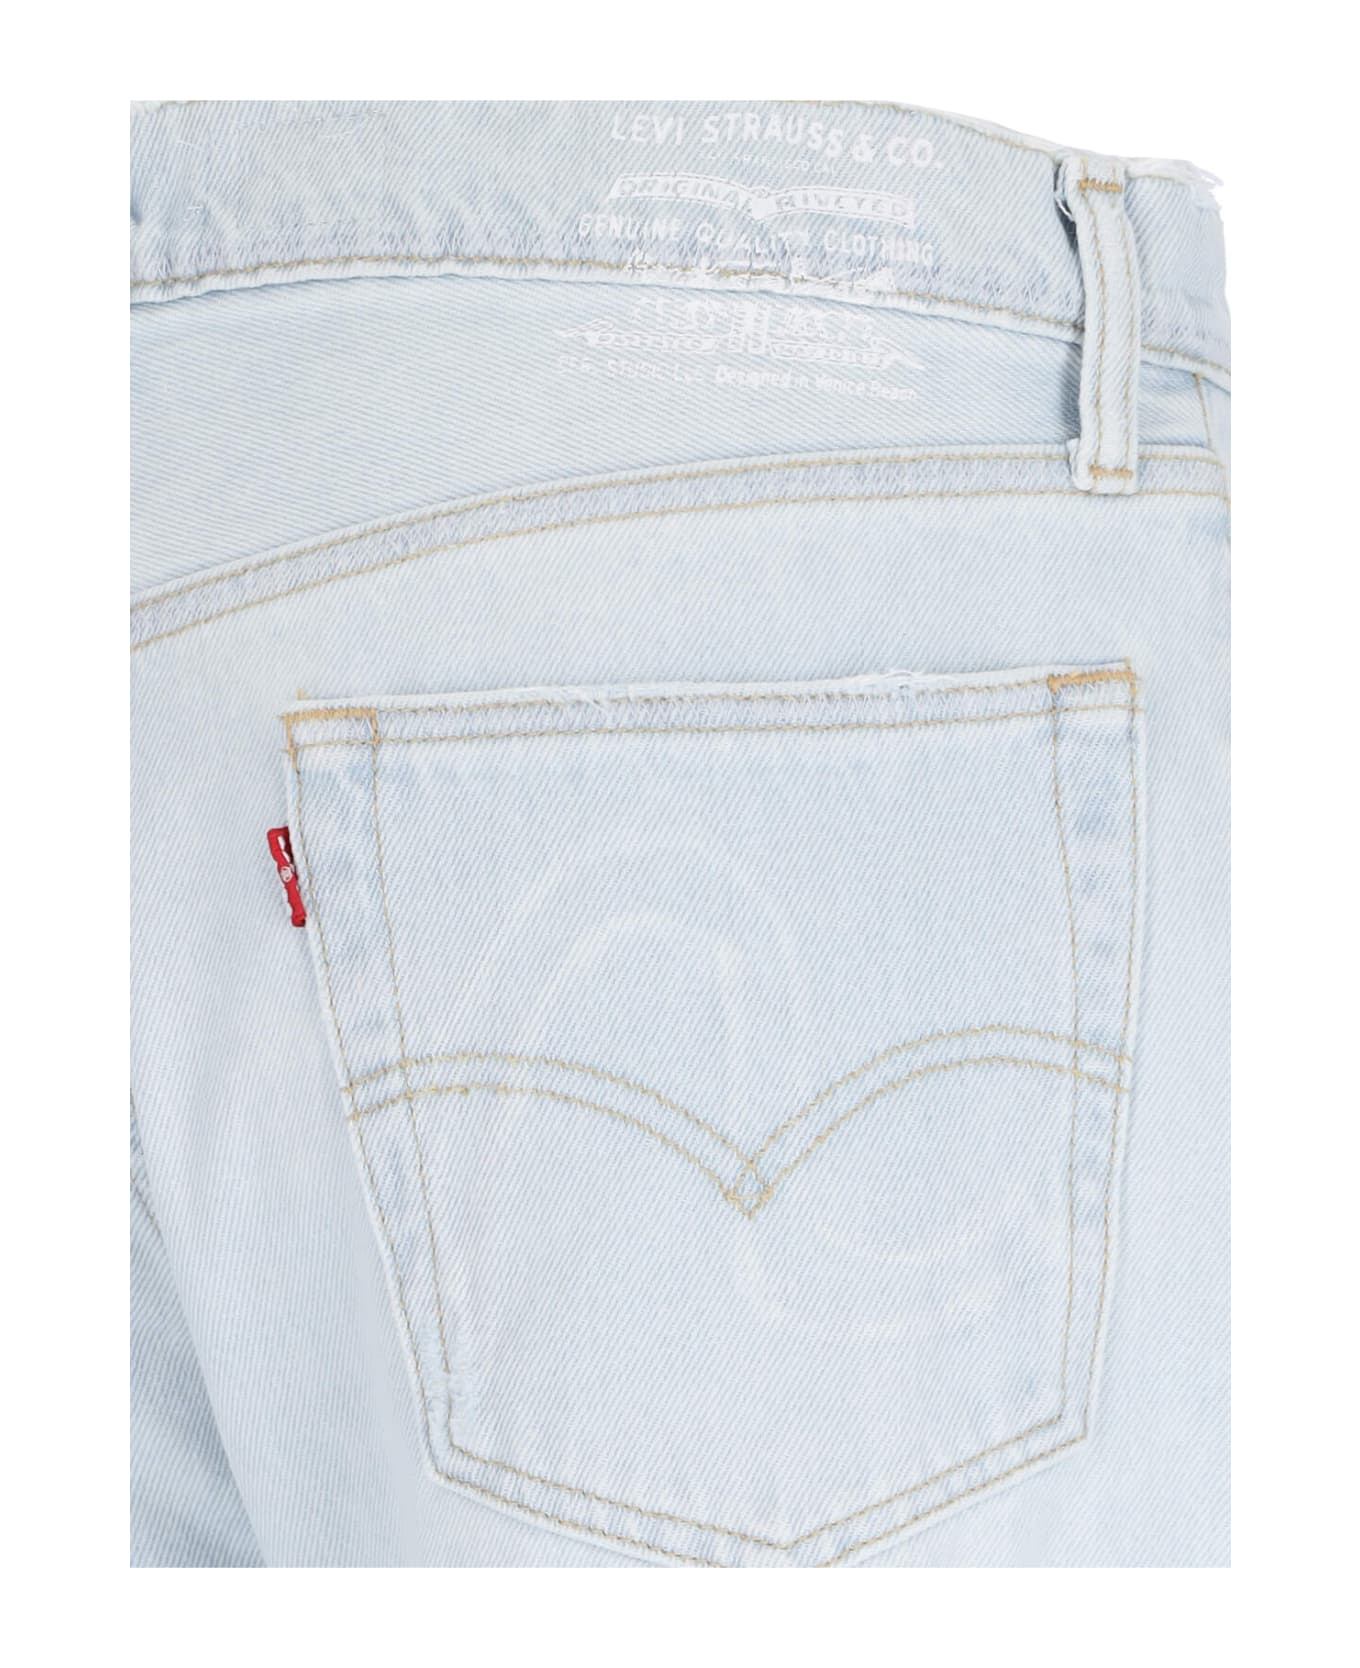 ERL X Levi's Bootcut Jeans - Light Blue name:463